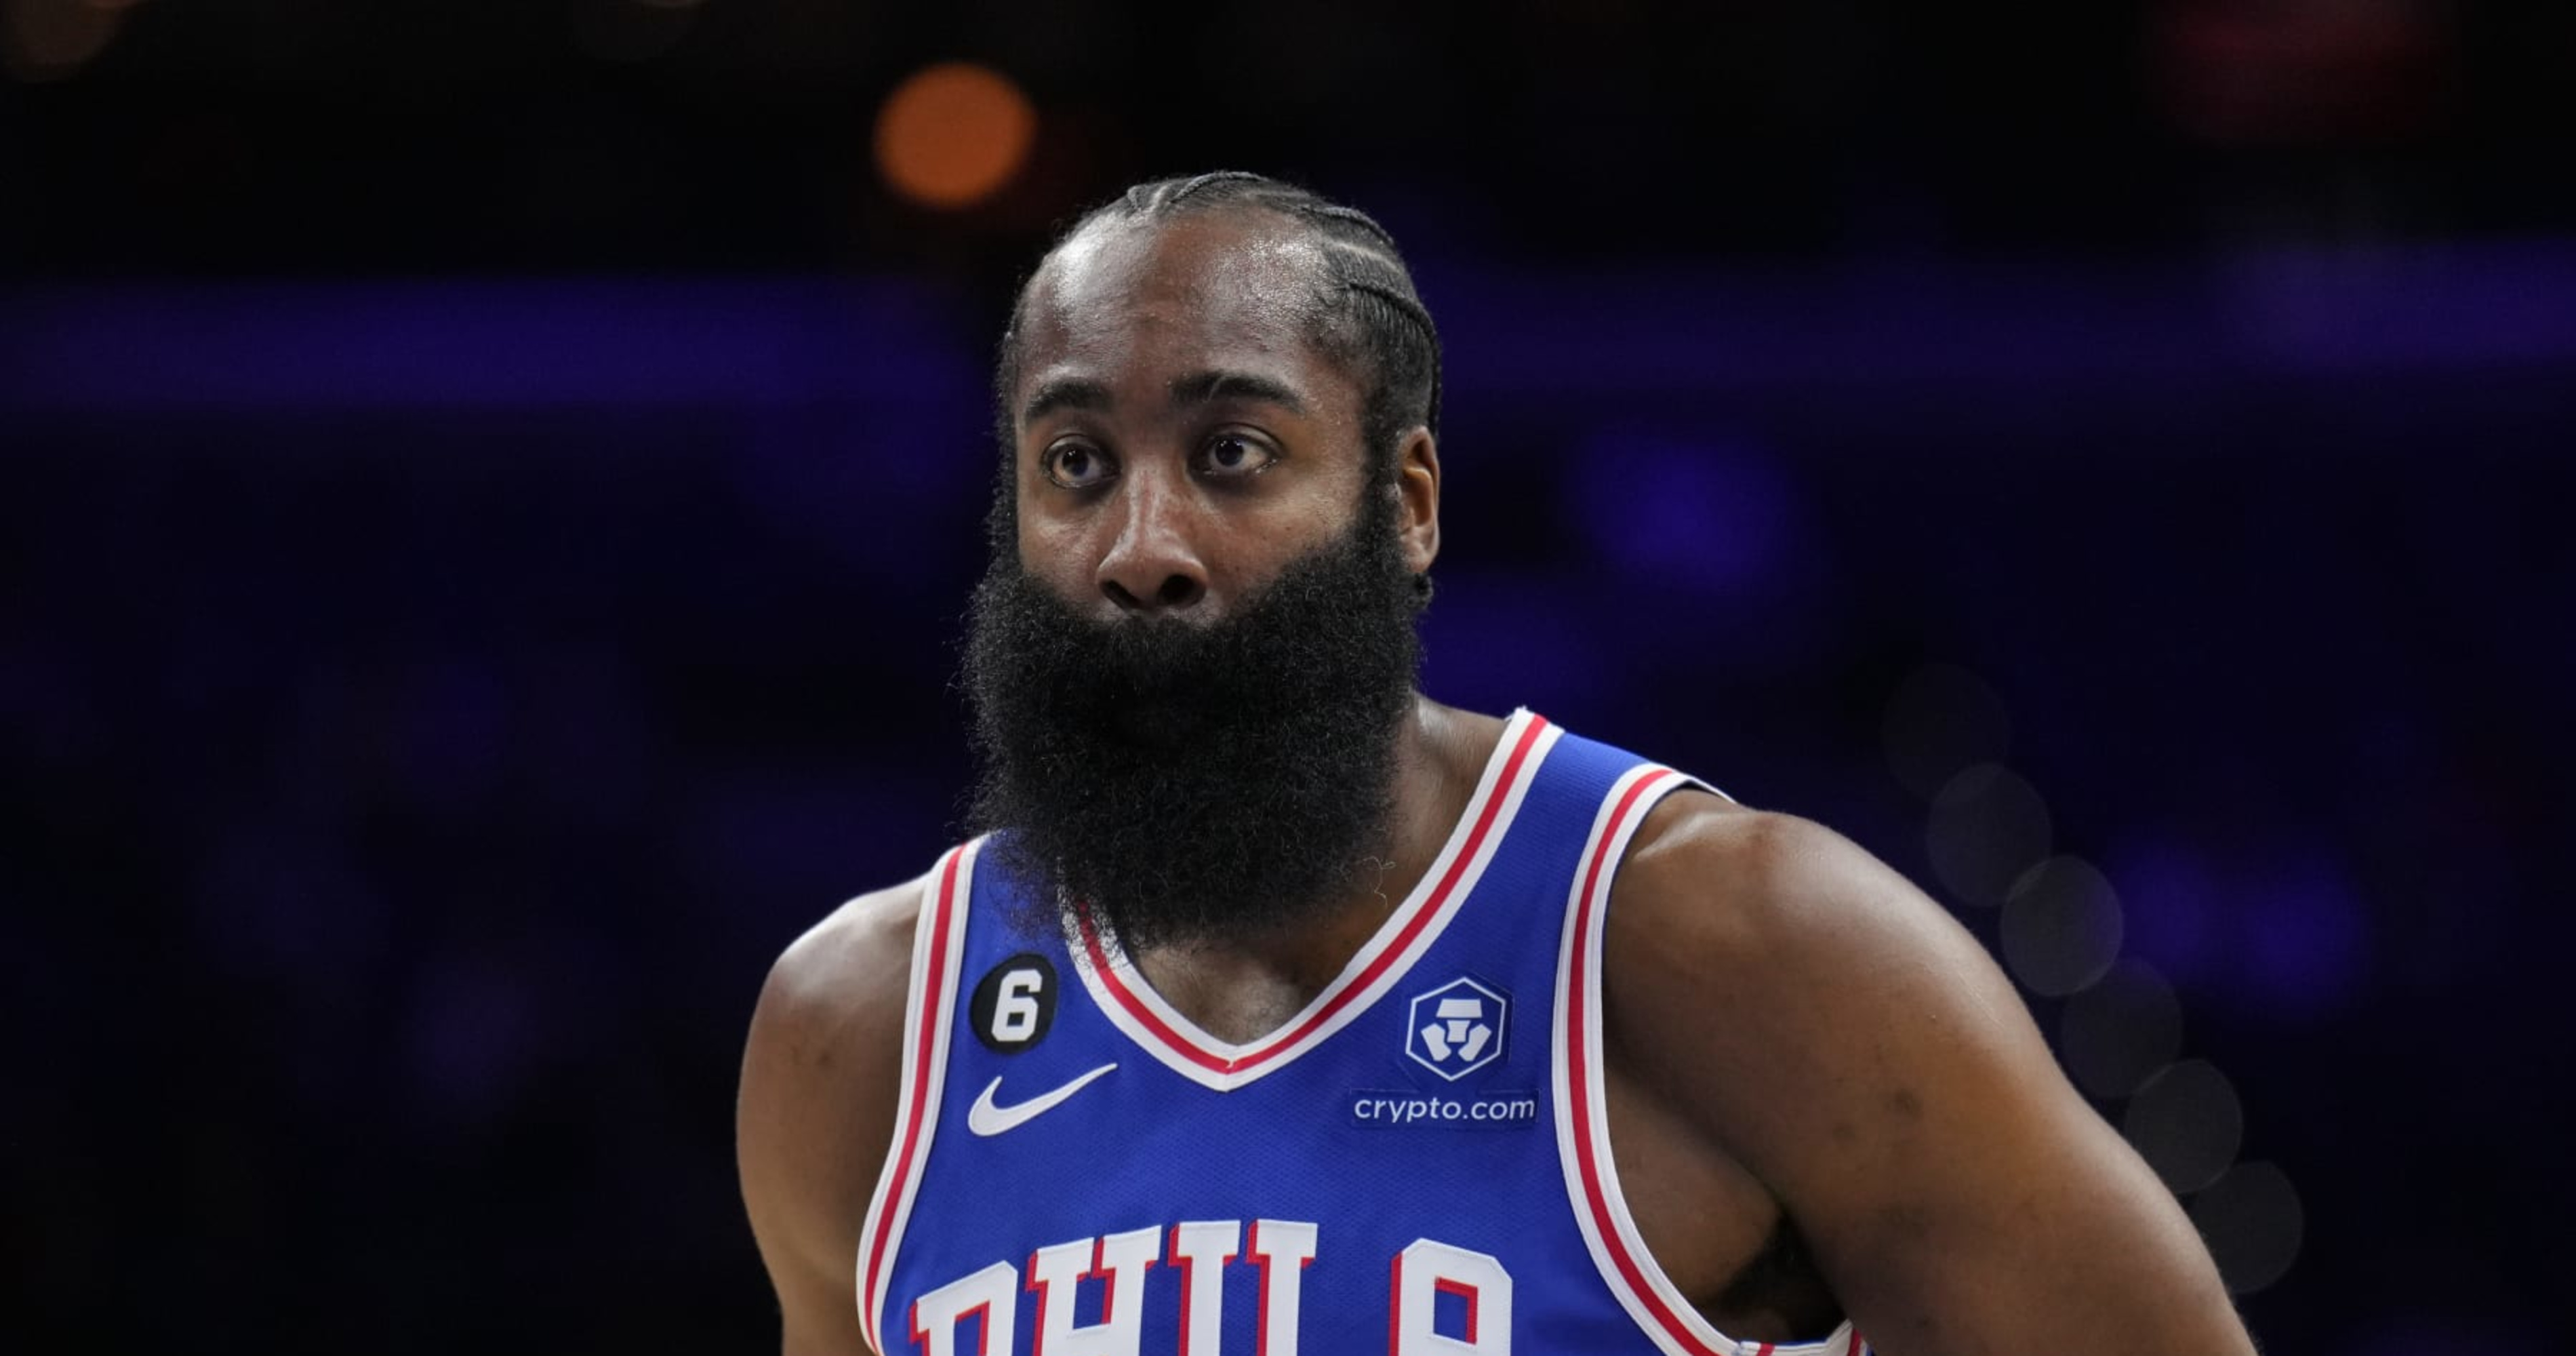 Report: 76ers' James Harden Targeting Return from Injury vs. Rockets on Monday